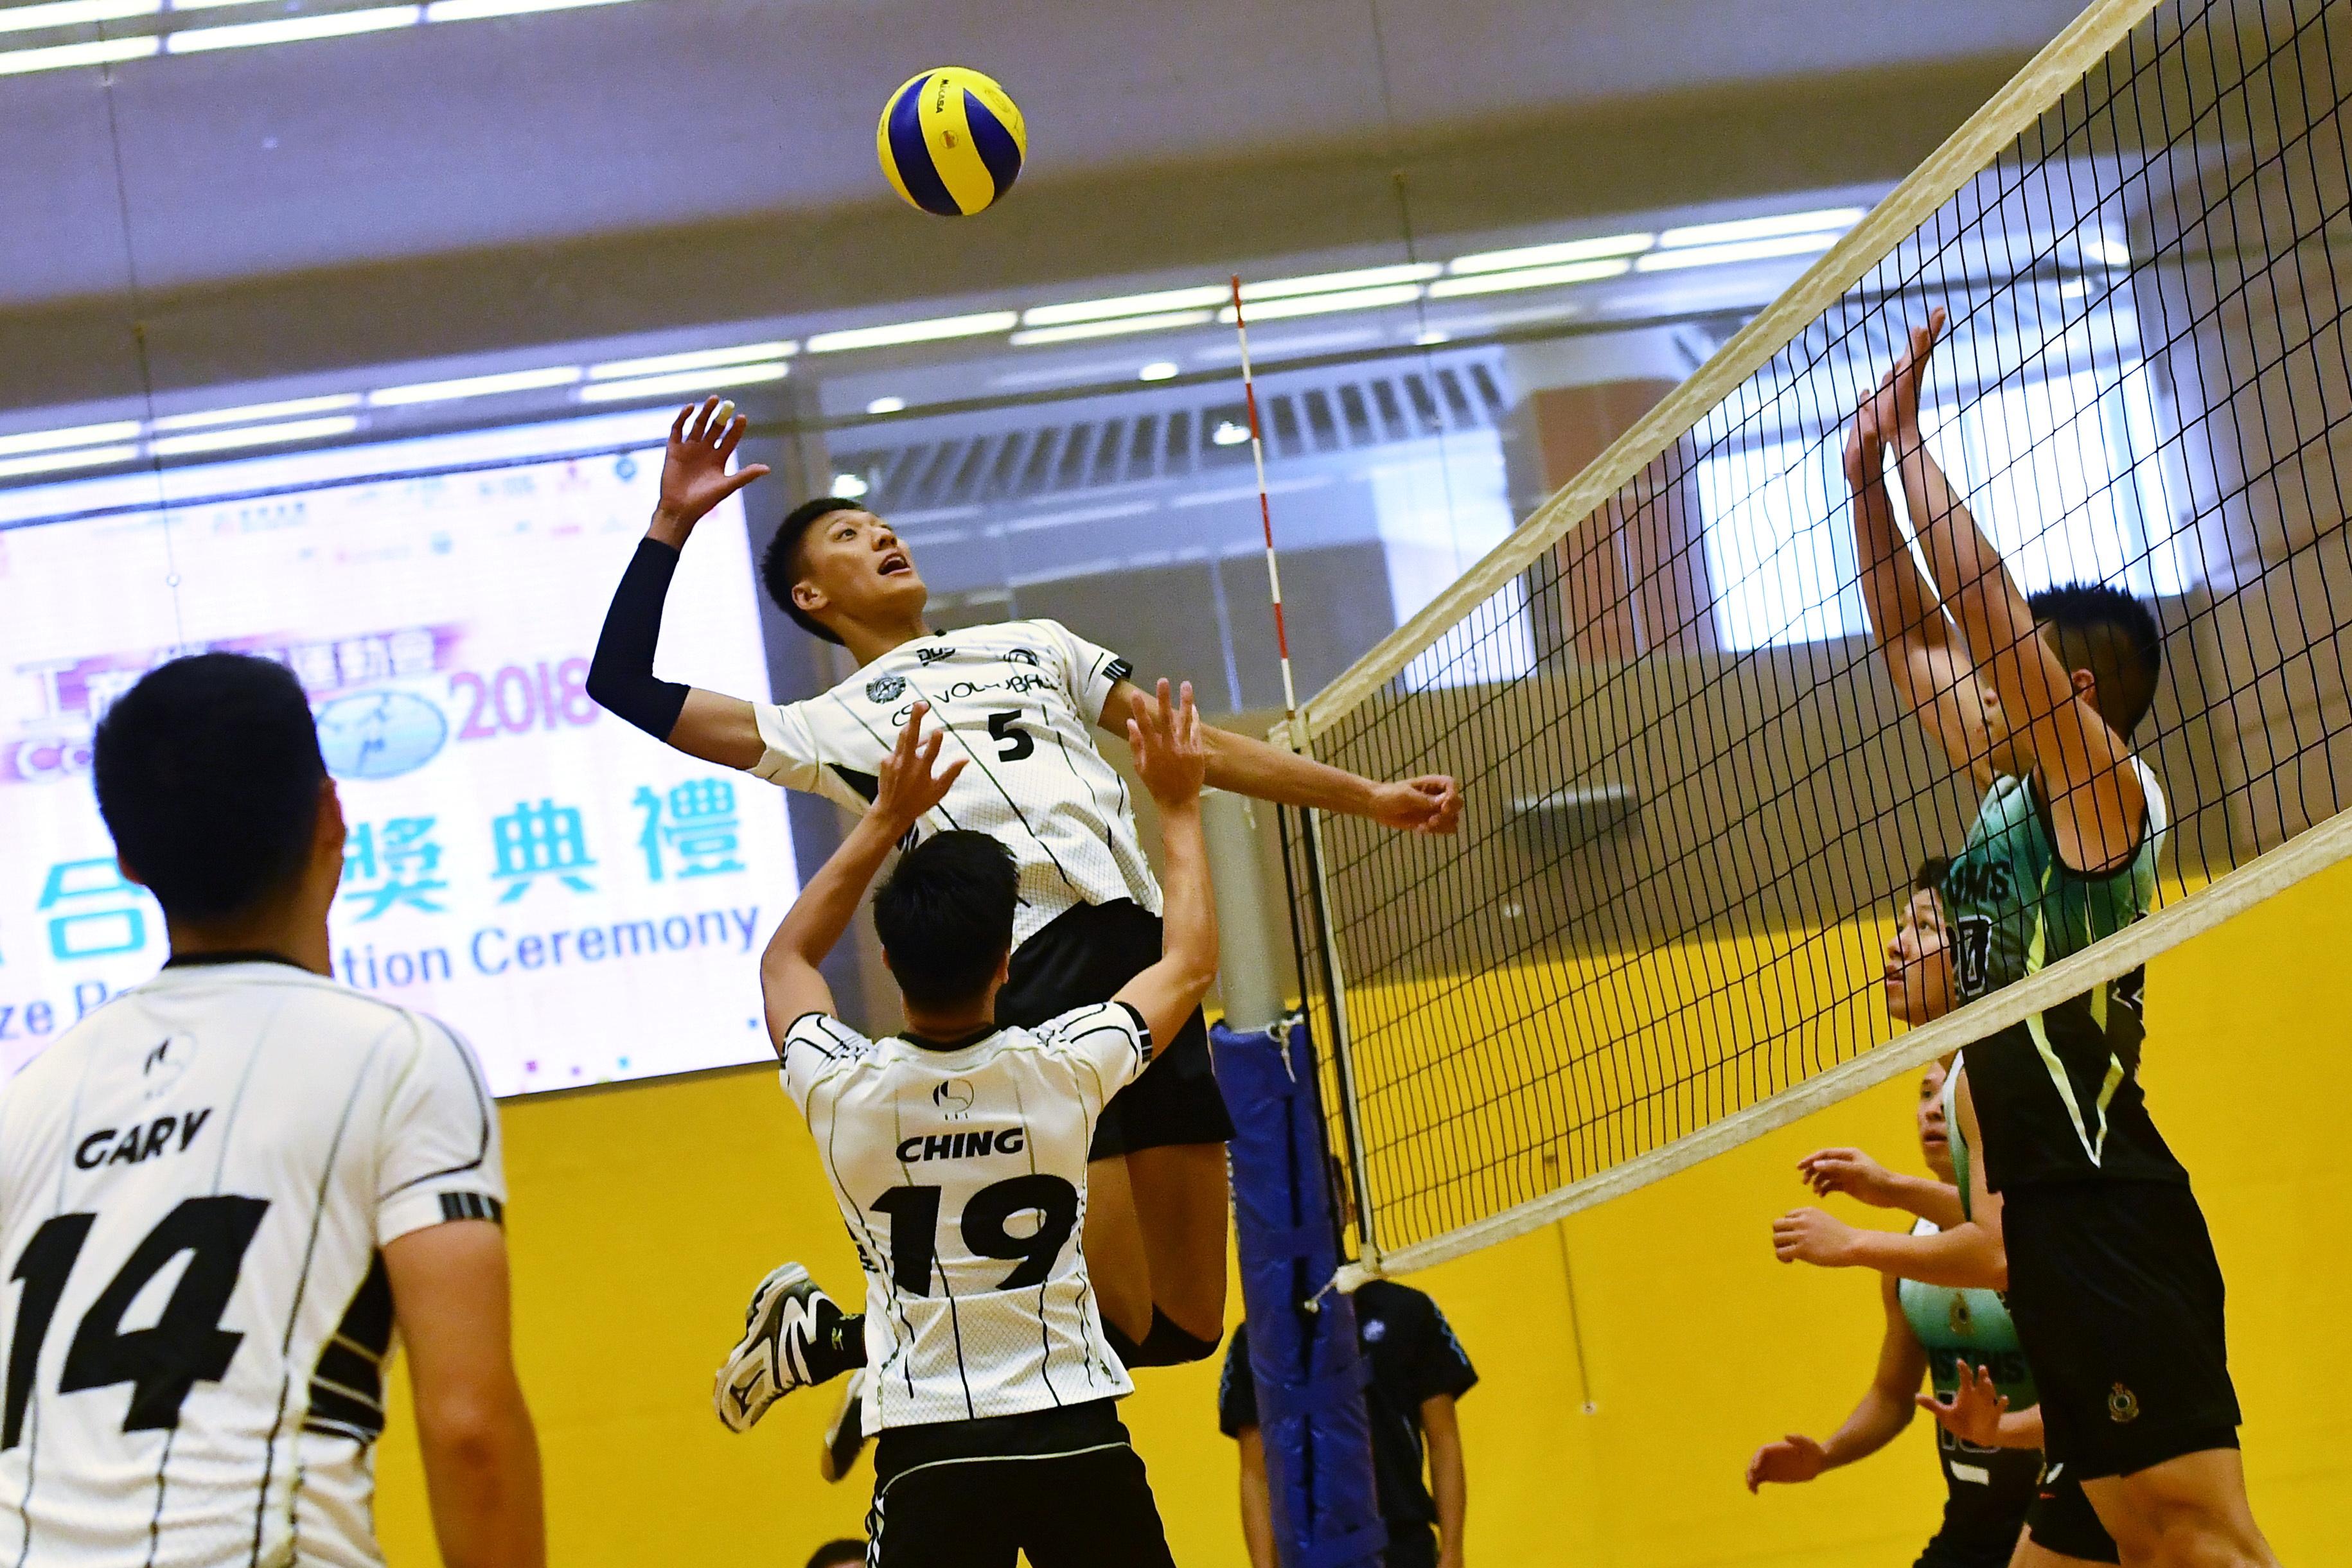 The Corporate Games 2023, organised by the Leisure and Cultural Services Department, will open for enrolment from October 17. Employees of commercial and industrial organisations and the public sector are welcome to take part in the Games. Photo shows athletes participating in a volleyball competition at the Corporate Games 2018.